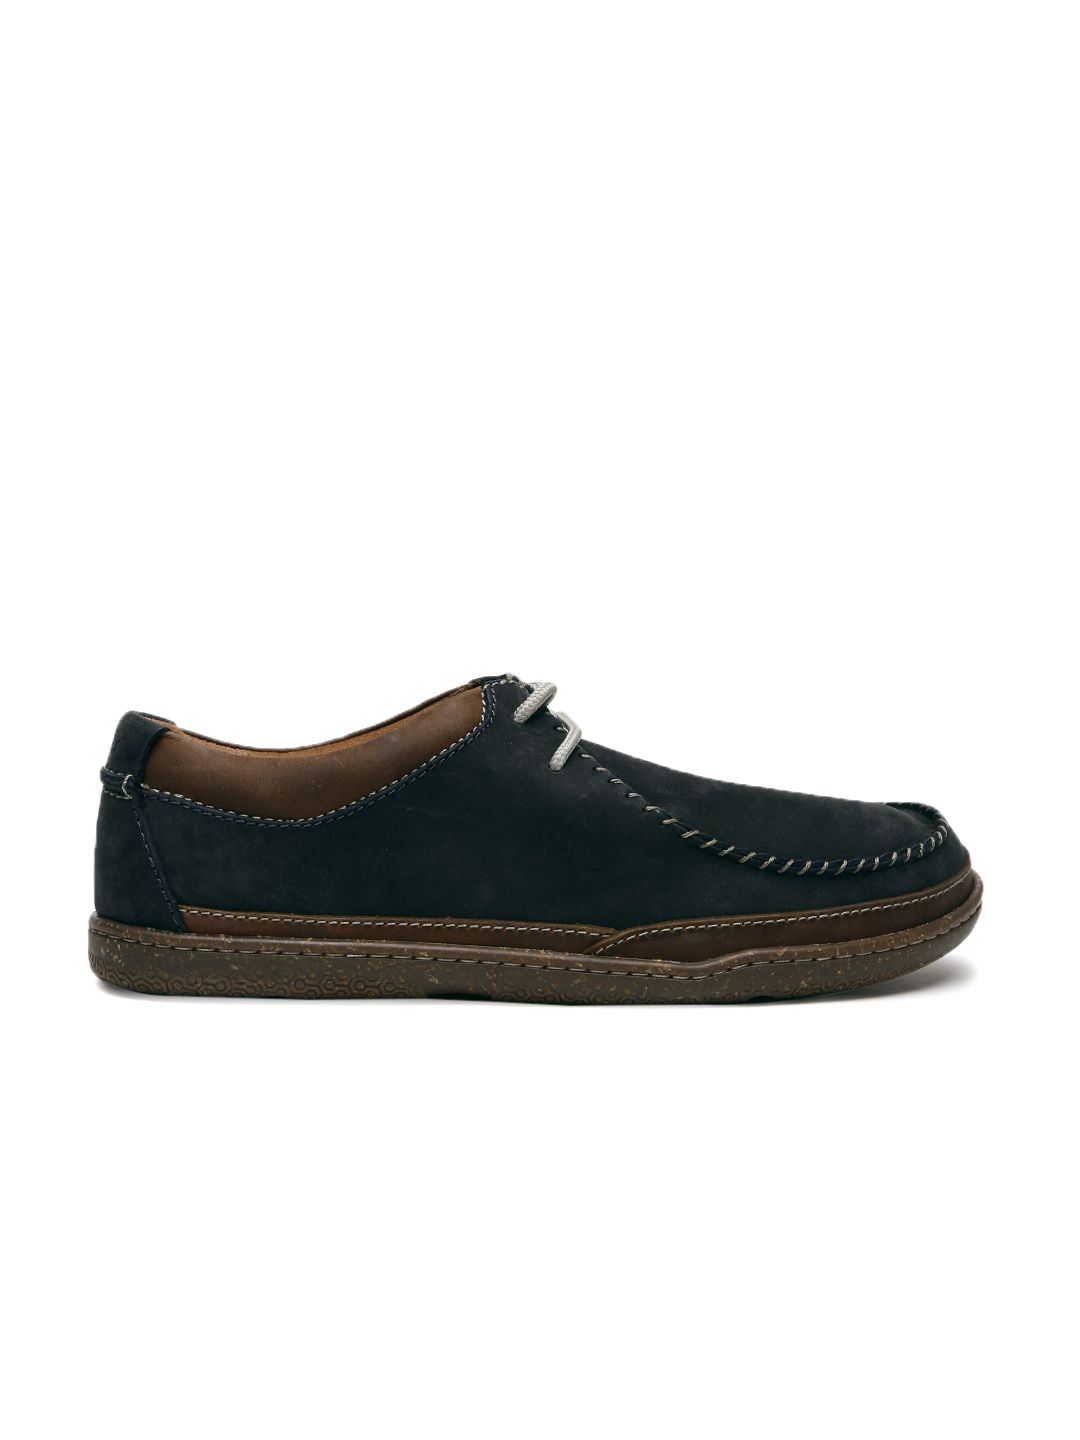 89 Limited Edition Clarks shoes cheapest prices for Trend in 2022